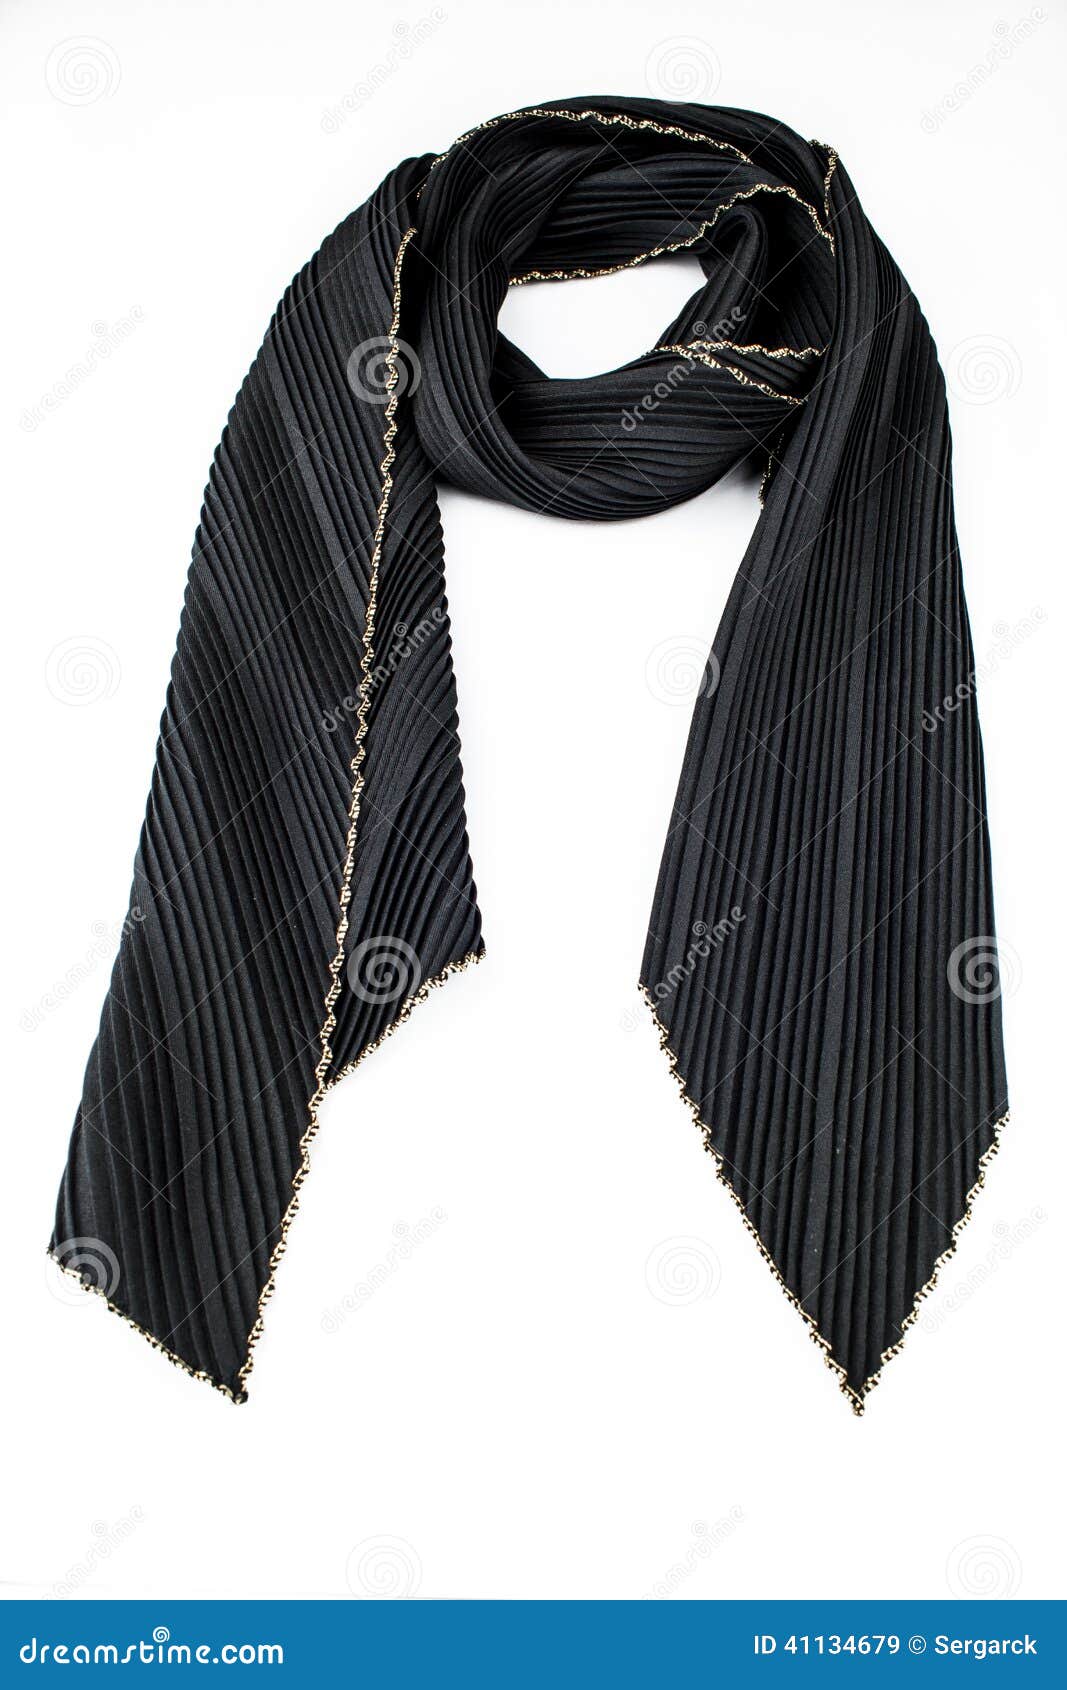 Black silk pleated scarf stock image. Image of accessory - 41134679